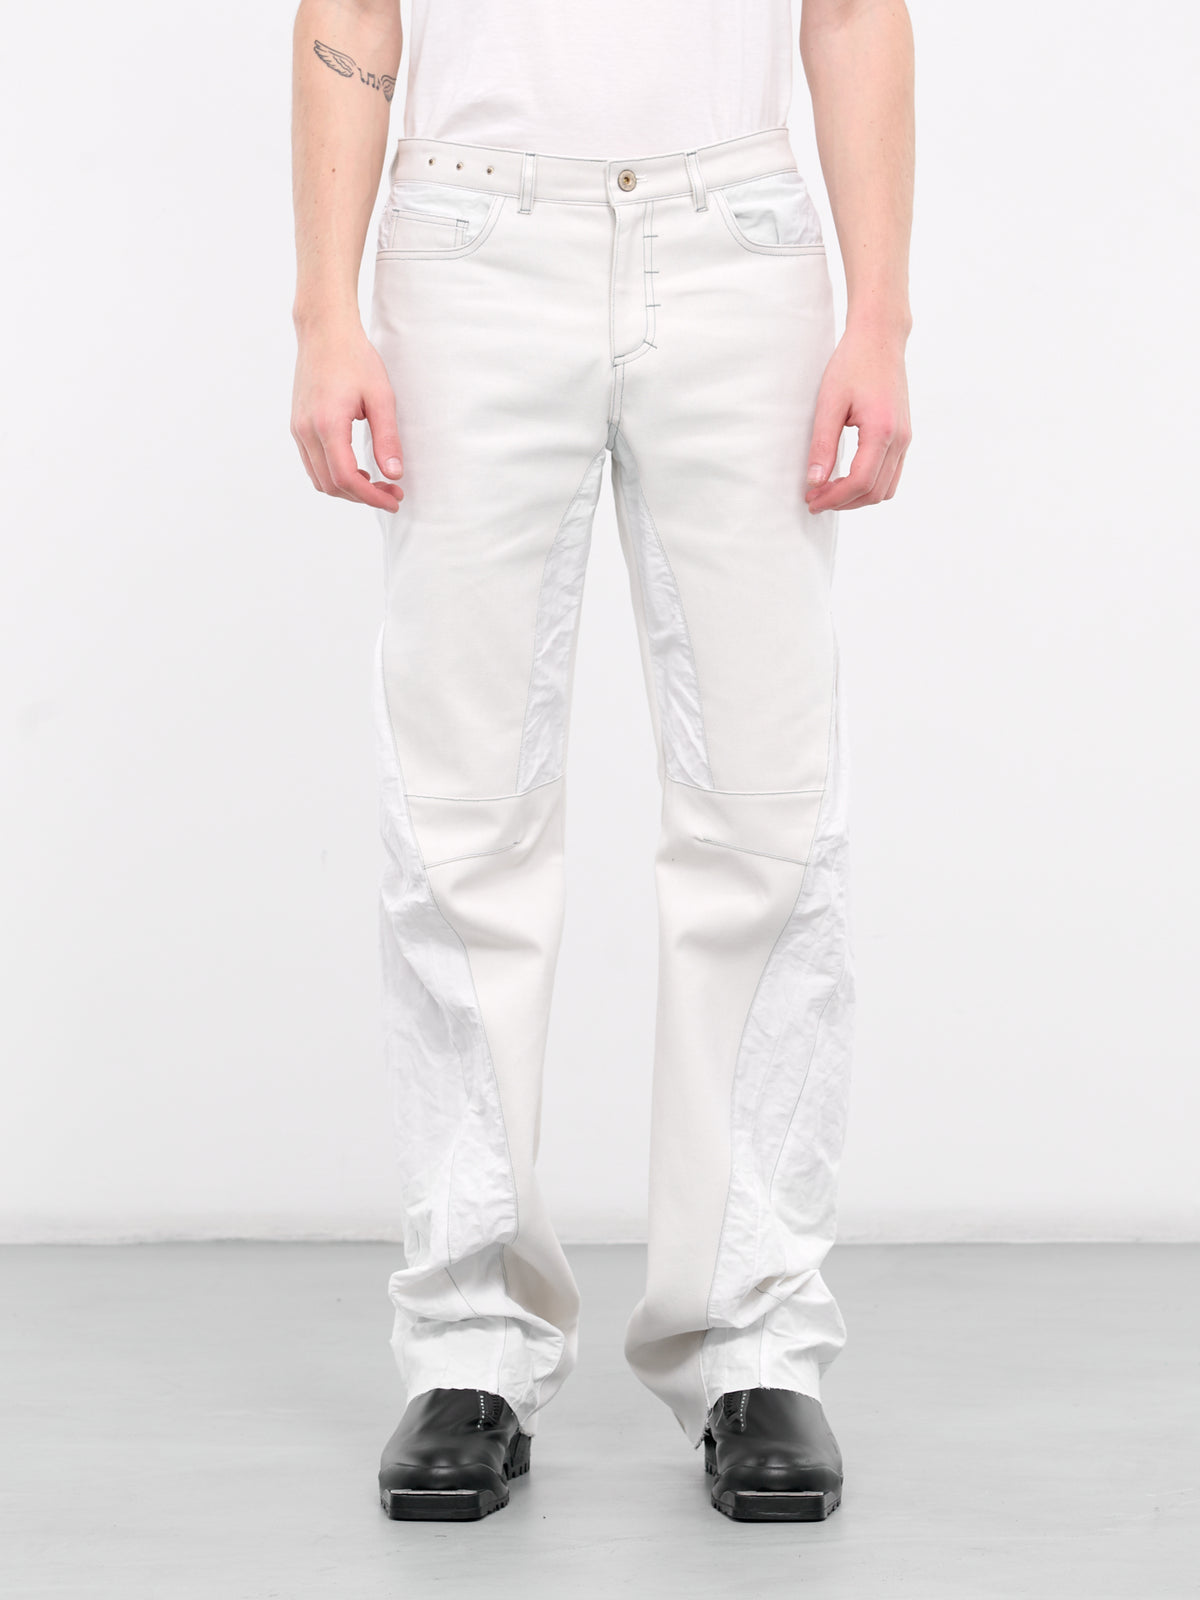 Human Shell Ruined Denim Trousers (CA05HST7WH-WHITE)